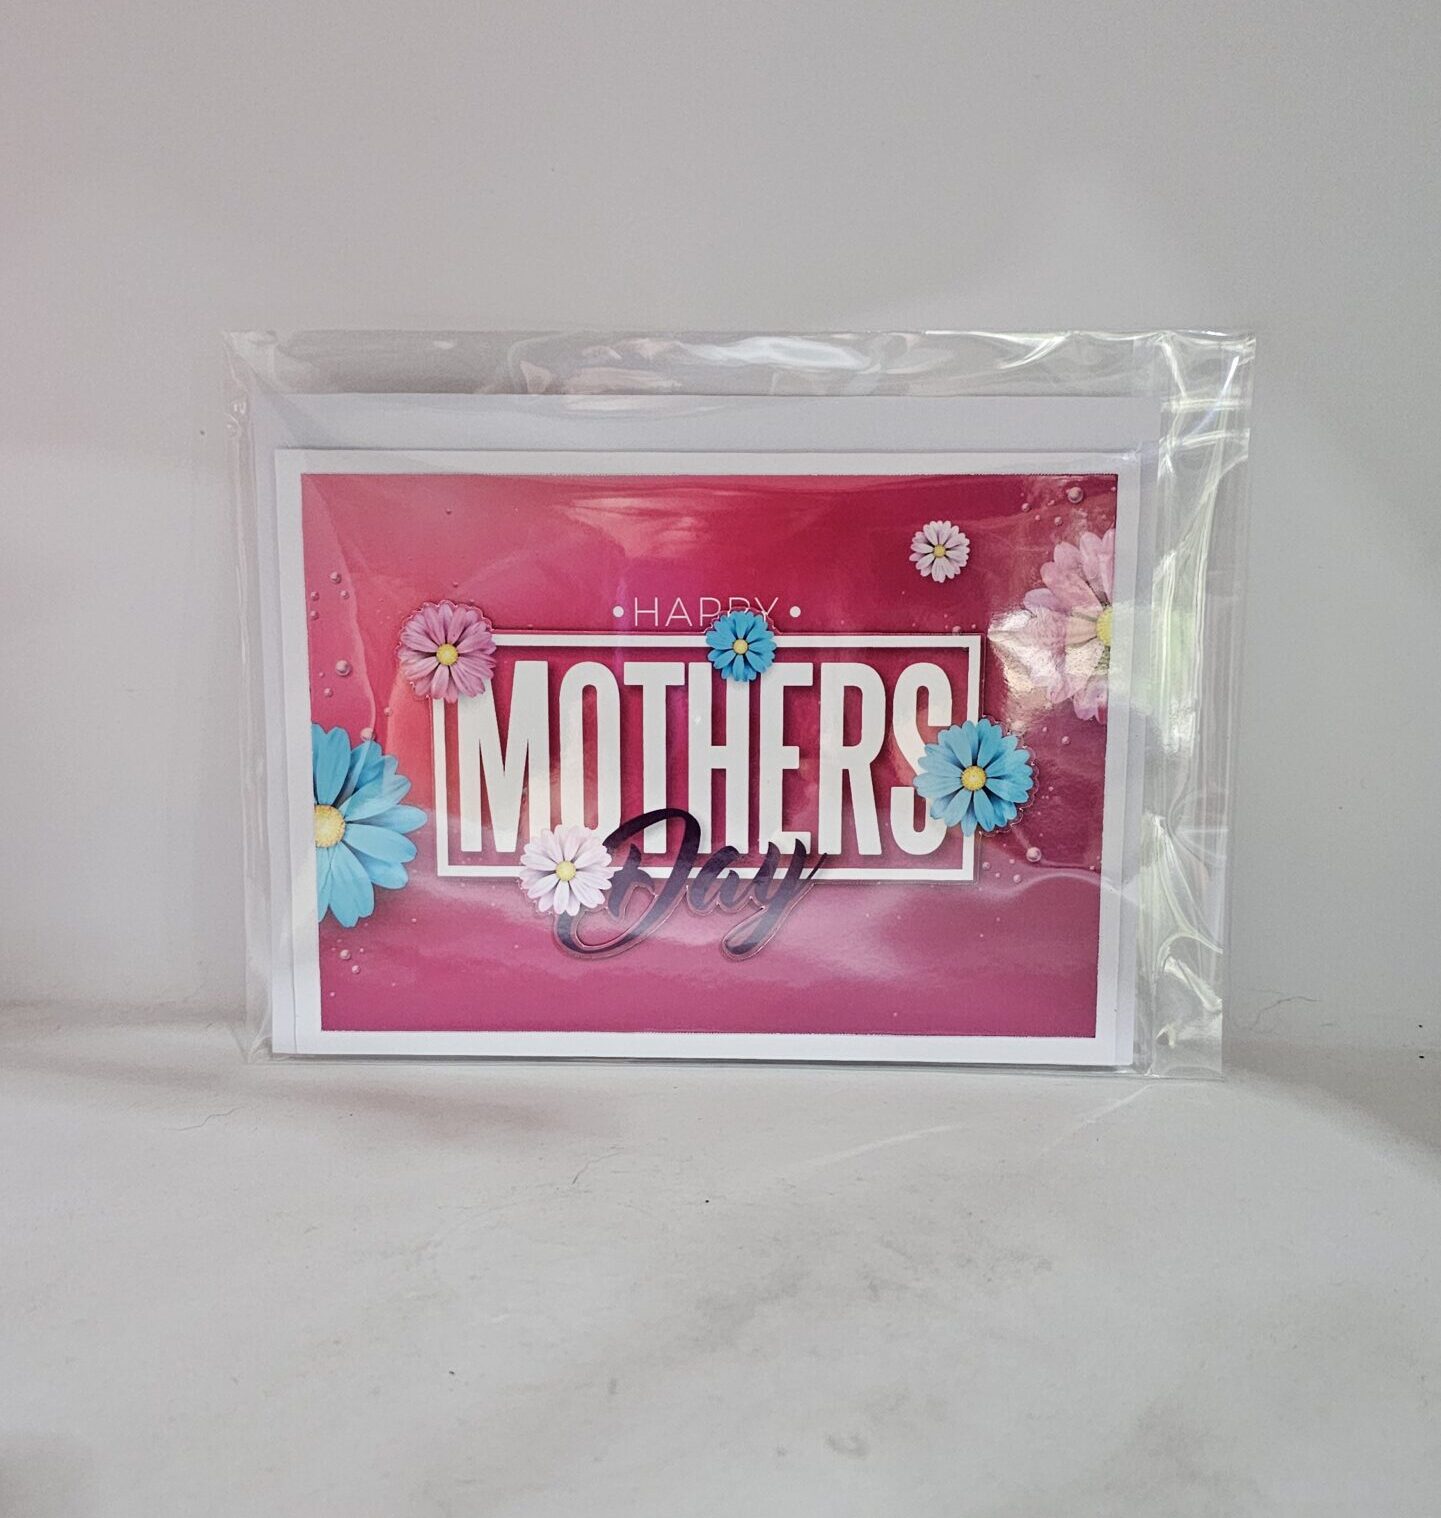 PINK, BLUE FLOWER – MOTHER’S DAY CARD